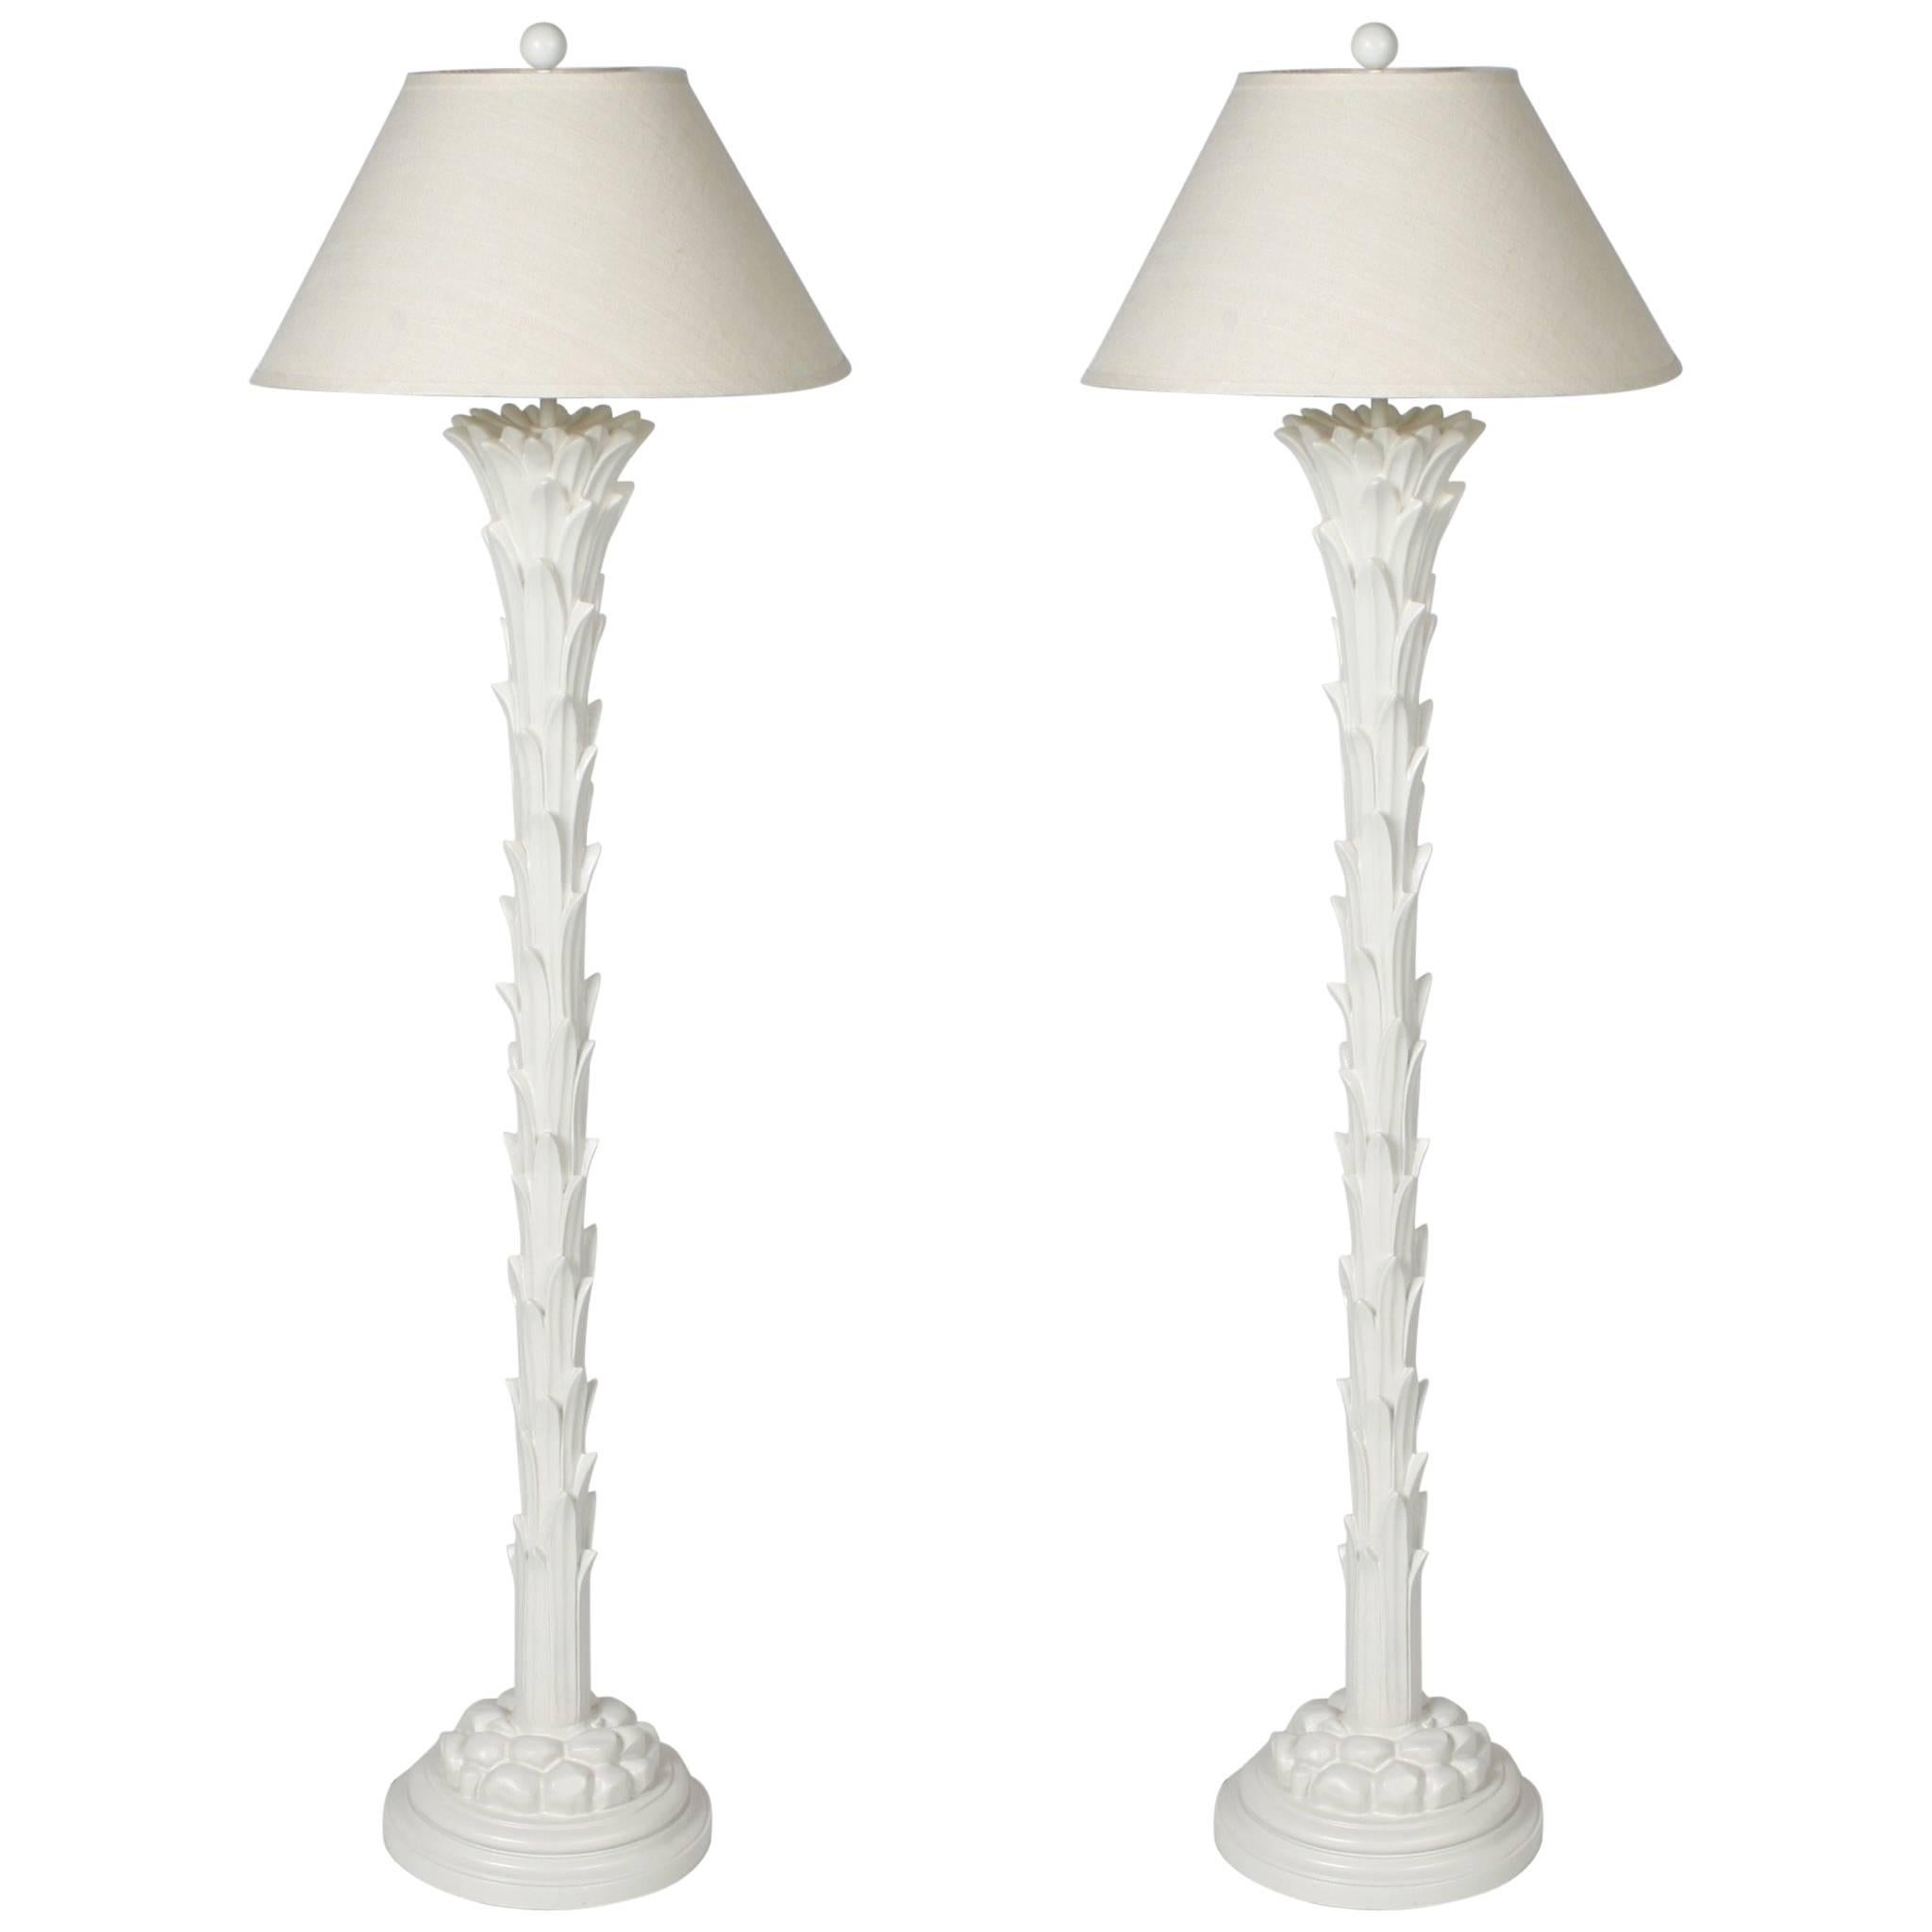 Pair of Plaster Chapman Palm Tree Floor Lamps in the Serge Roche